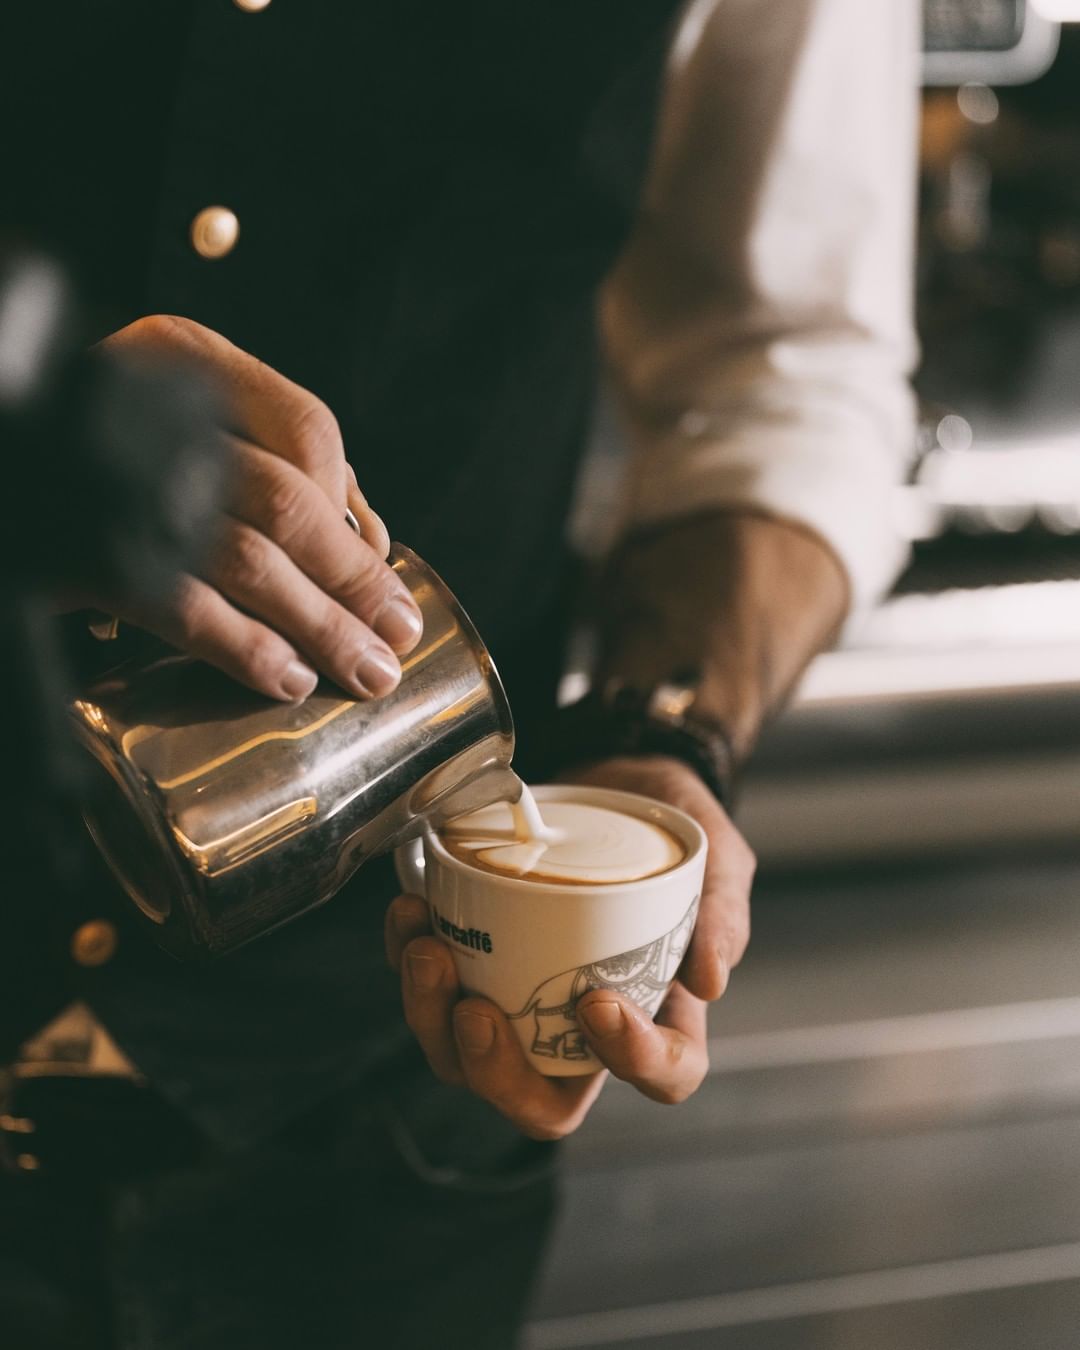 A barmen pouring a coffee, expertly - making a stunning visual